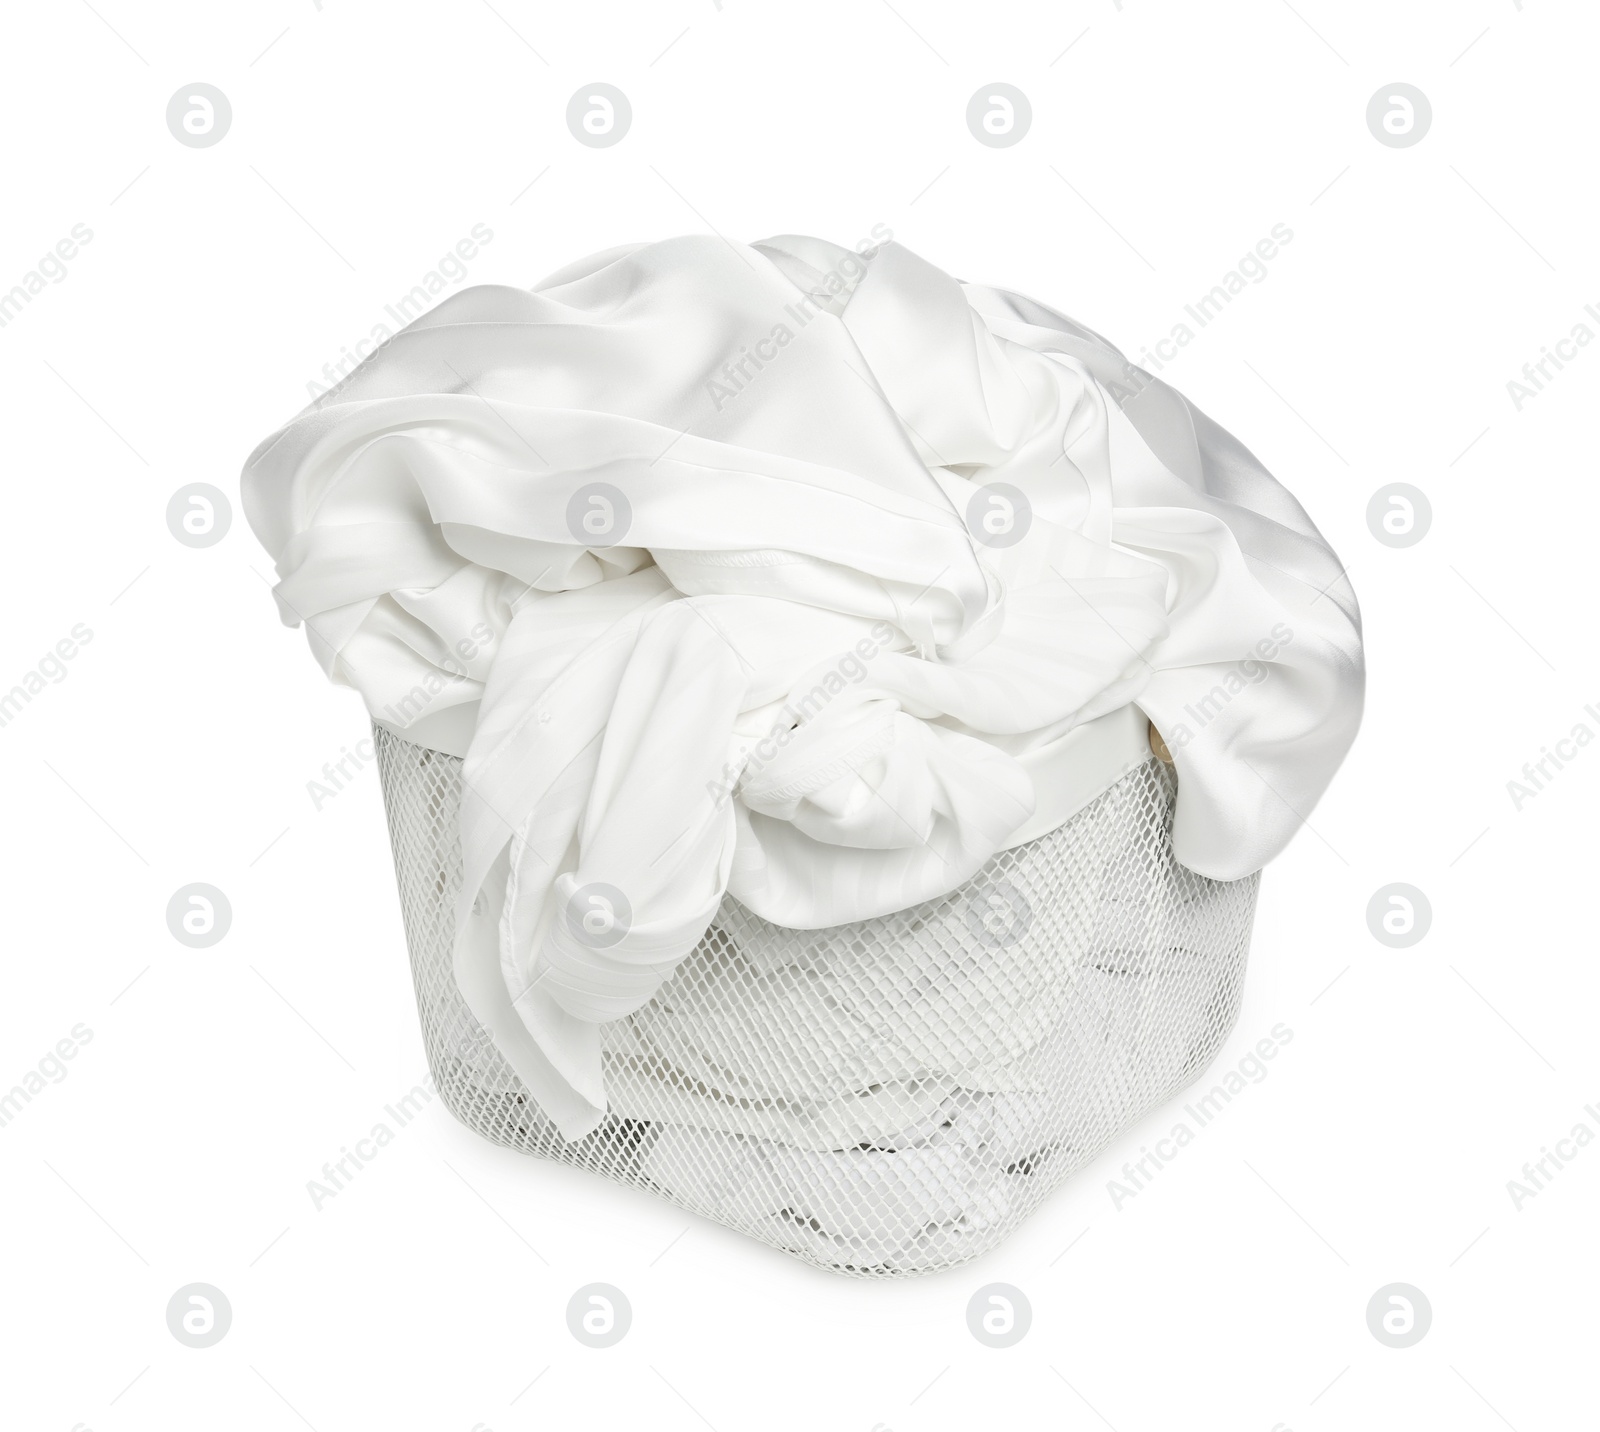 Photo of Laundry basket with clean clothes isolated on white